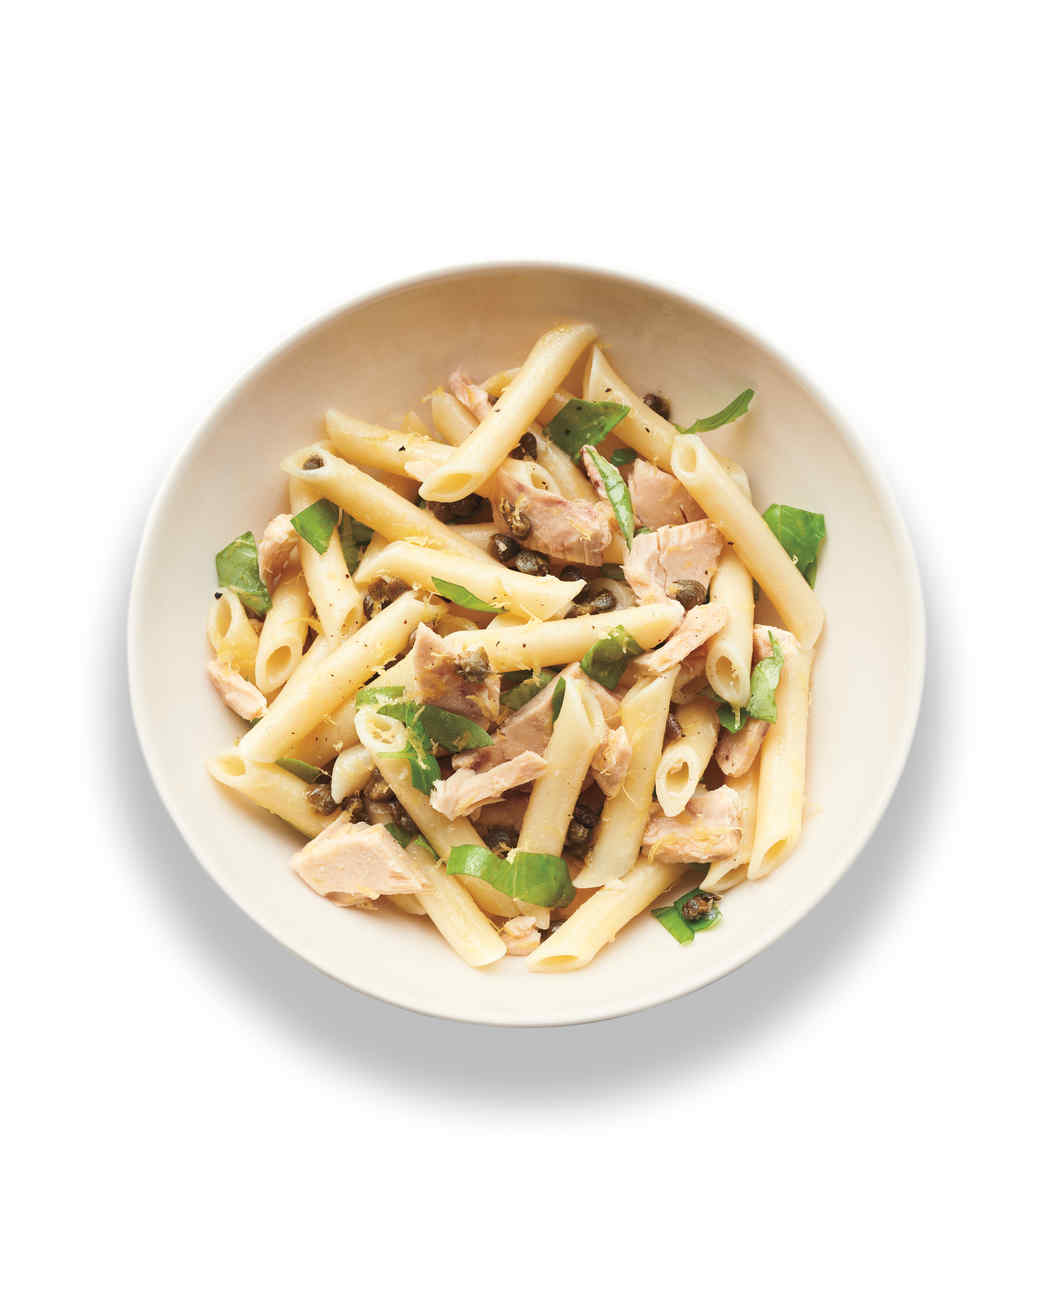 Tuna Pasta Recipes: 17 Oppor-tuna-ties For Delicious Pantry Dinners ...